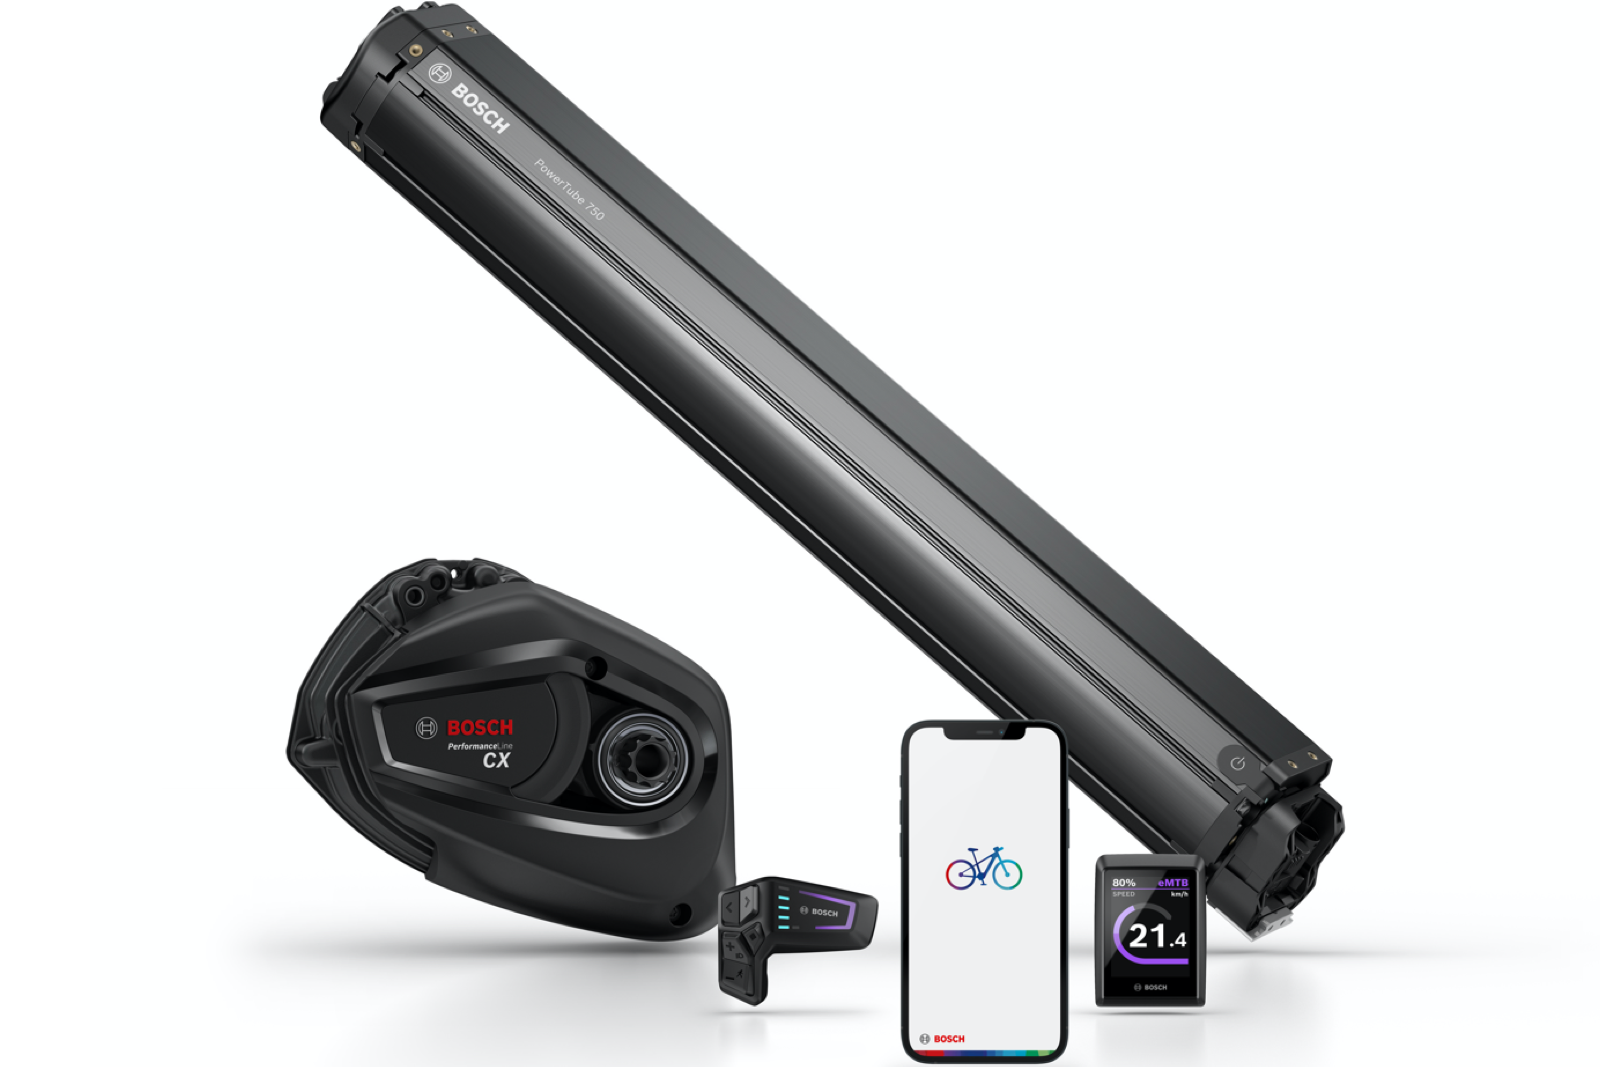 Bosch eBike Systems releases new smart system with fresh app and display photo 1